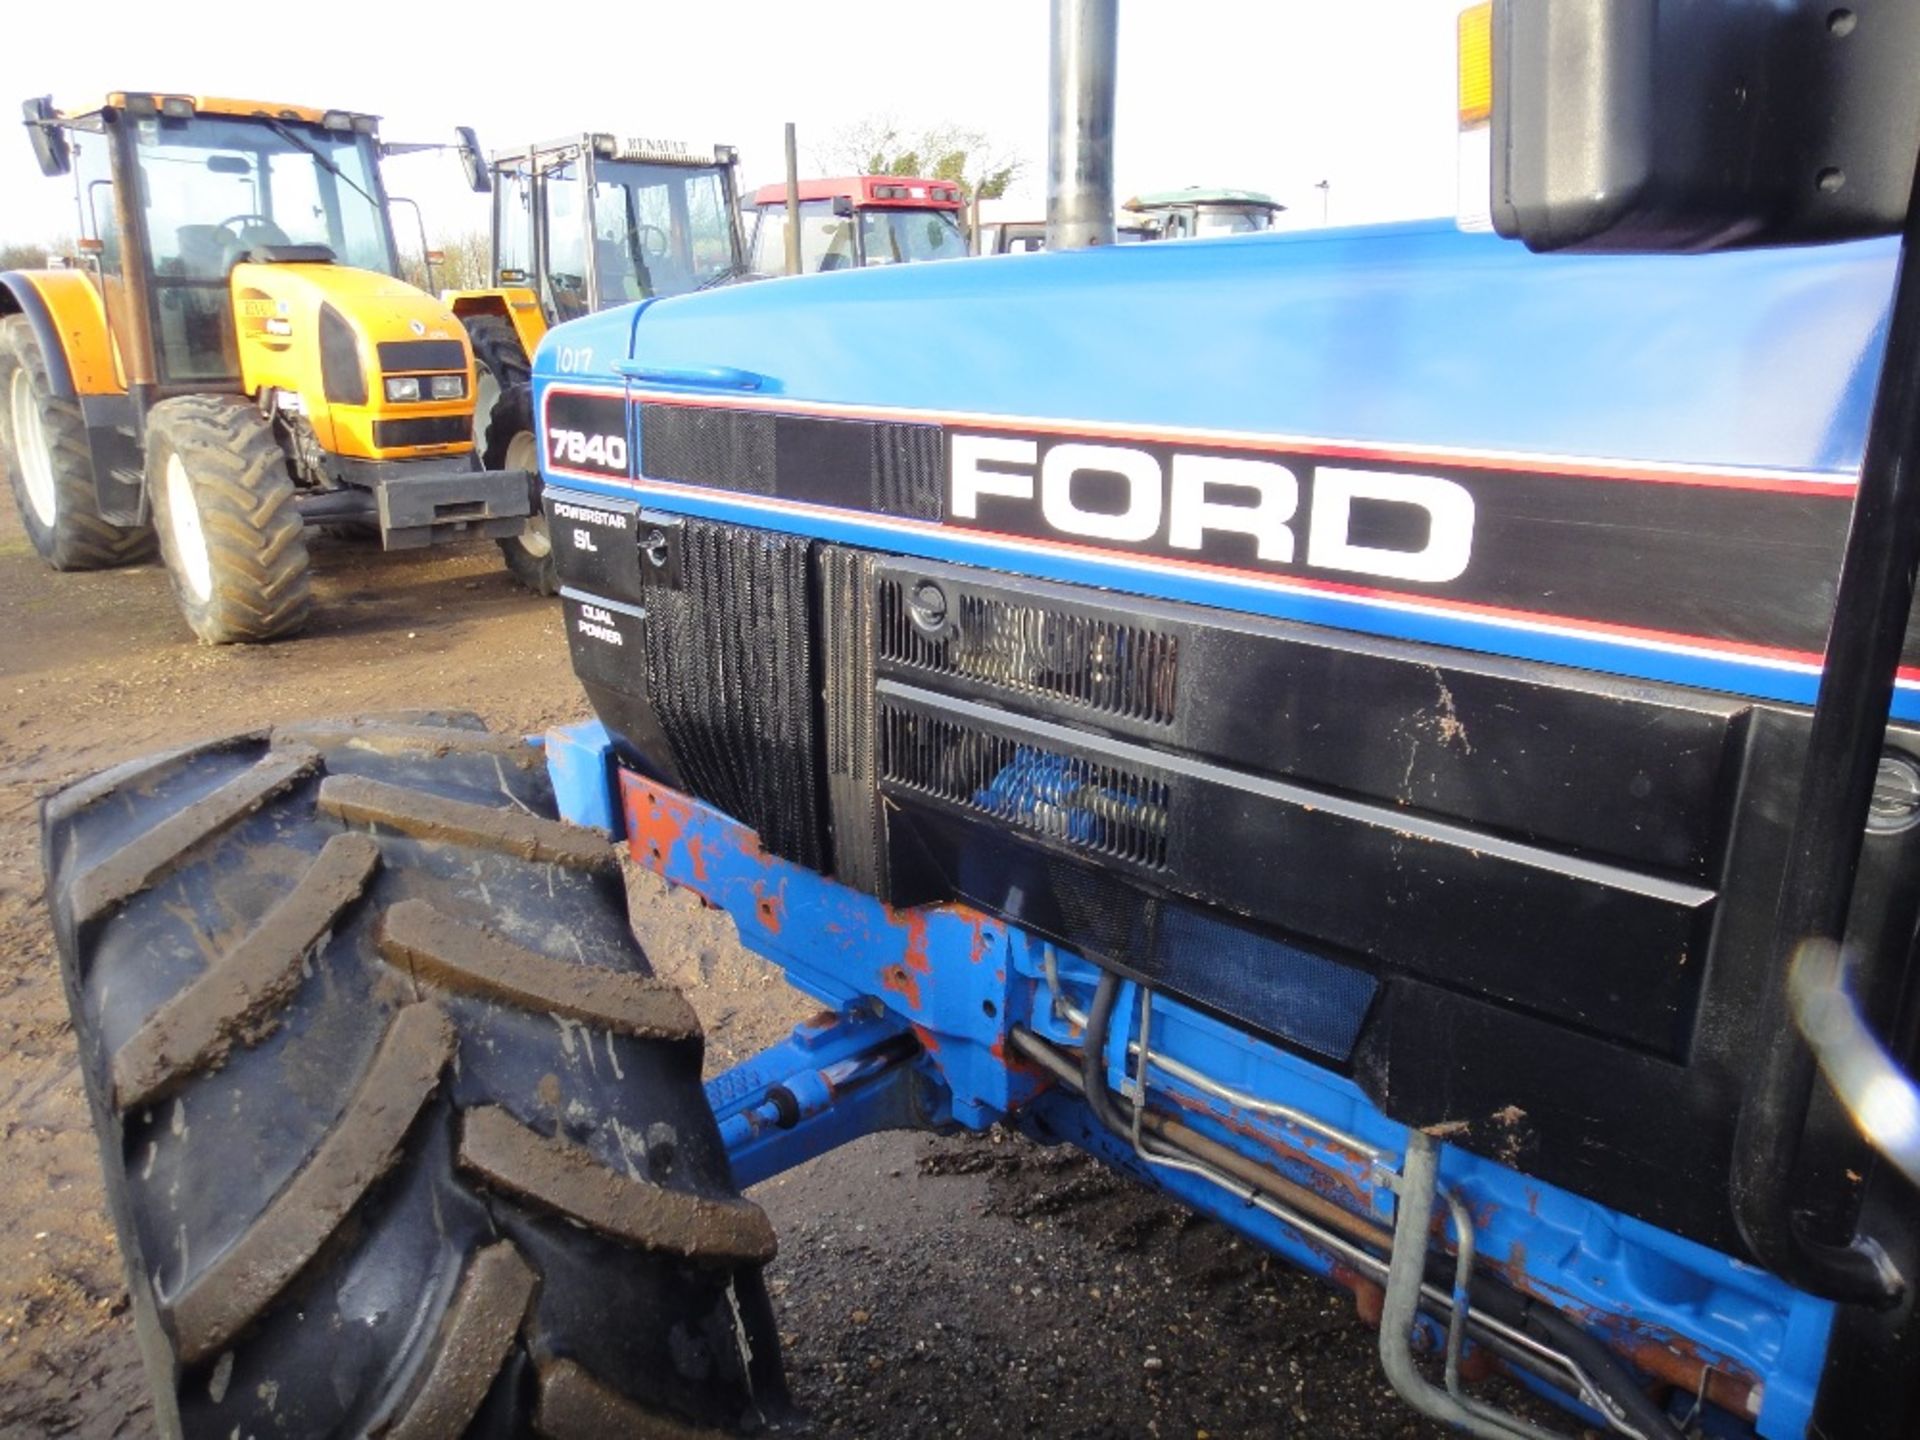 1994 Ford/New Holland 7840 SLDP 4wd Tractor. Circa 8200 hrs. French registration book will be - Image 9 of 14